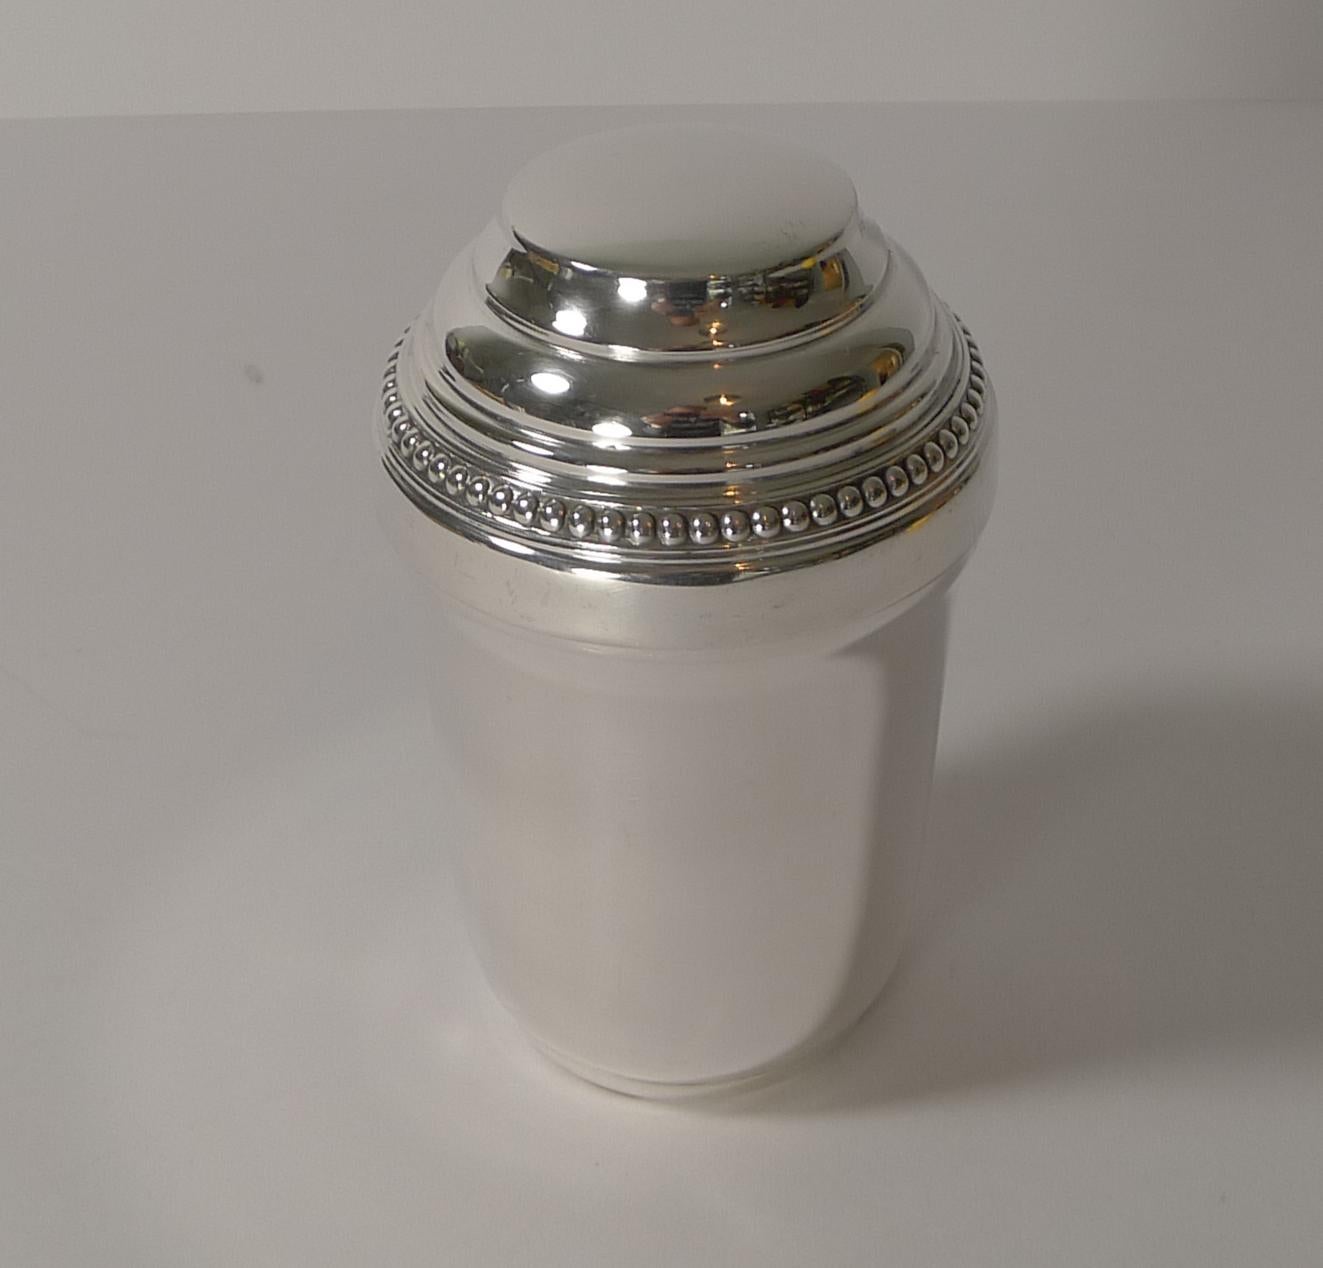 A charming and unusual individual cocktail shaker with an integral lemon squeezer / reamer by the top notch French silversmith, Maison Christofle.

The silver plated shaker is part of the Gallia range and dates to circa 1930-1940, fully marked on